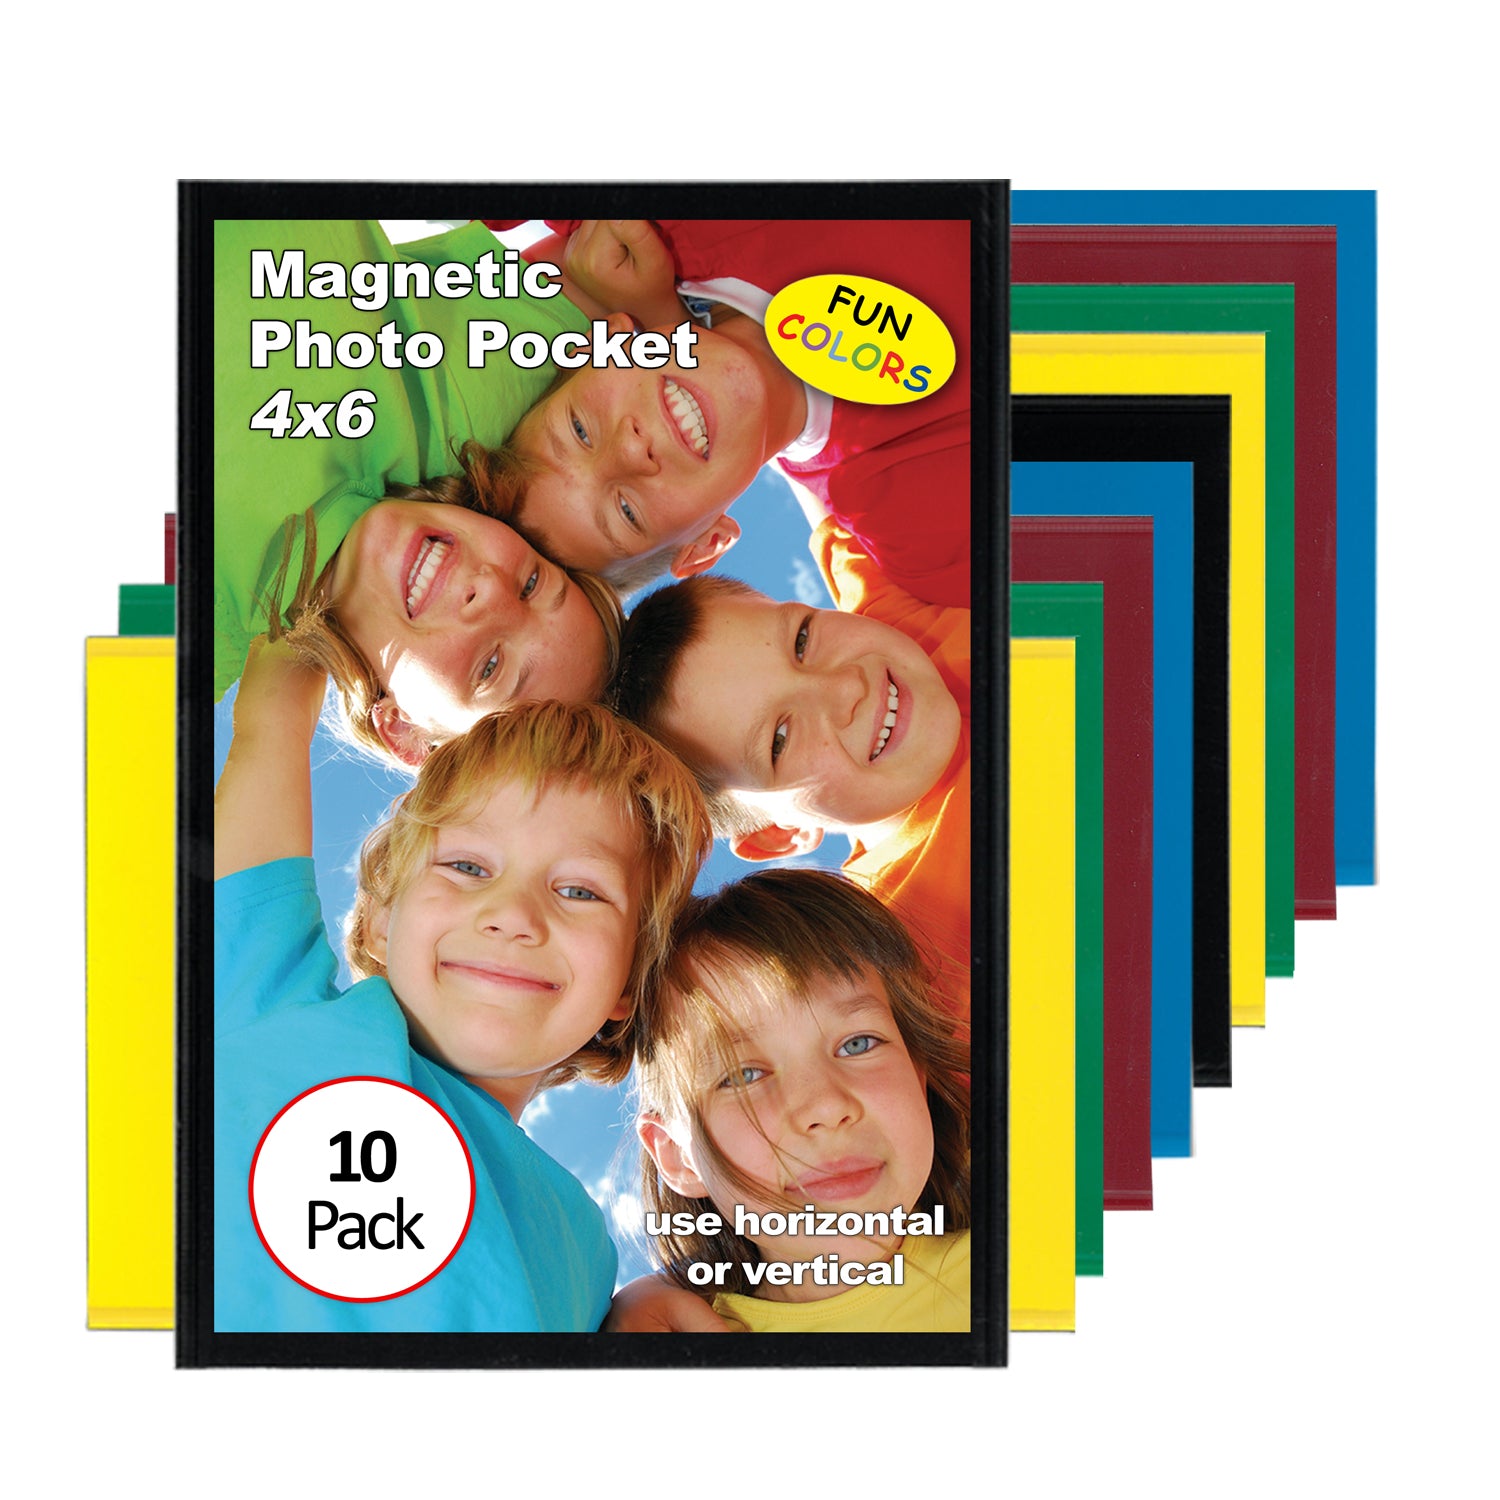 Magtech Magnetic Photo Pocket Picture Frame, Color Pops, Holds 4x6 inch Photos, 10 Pack Assorted Colors (94610)